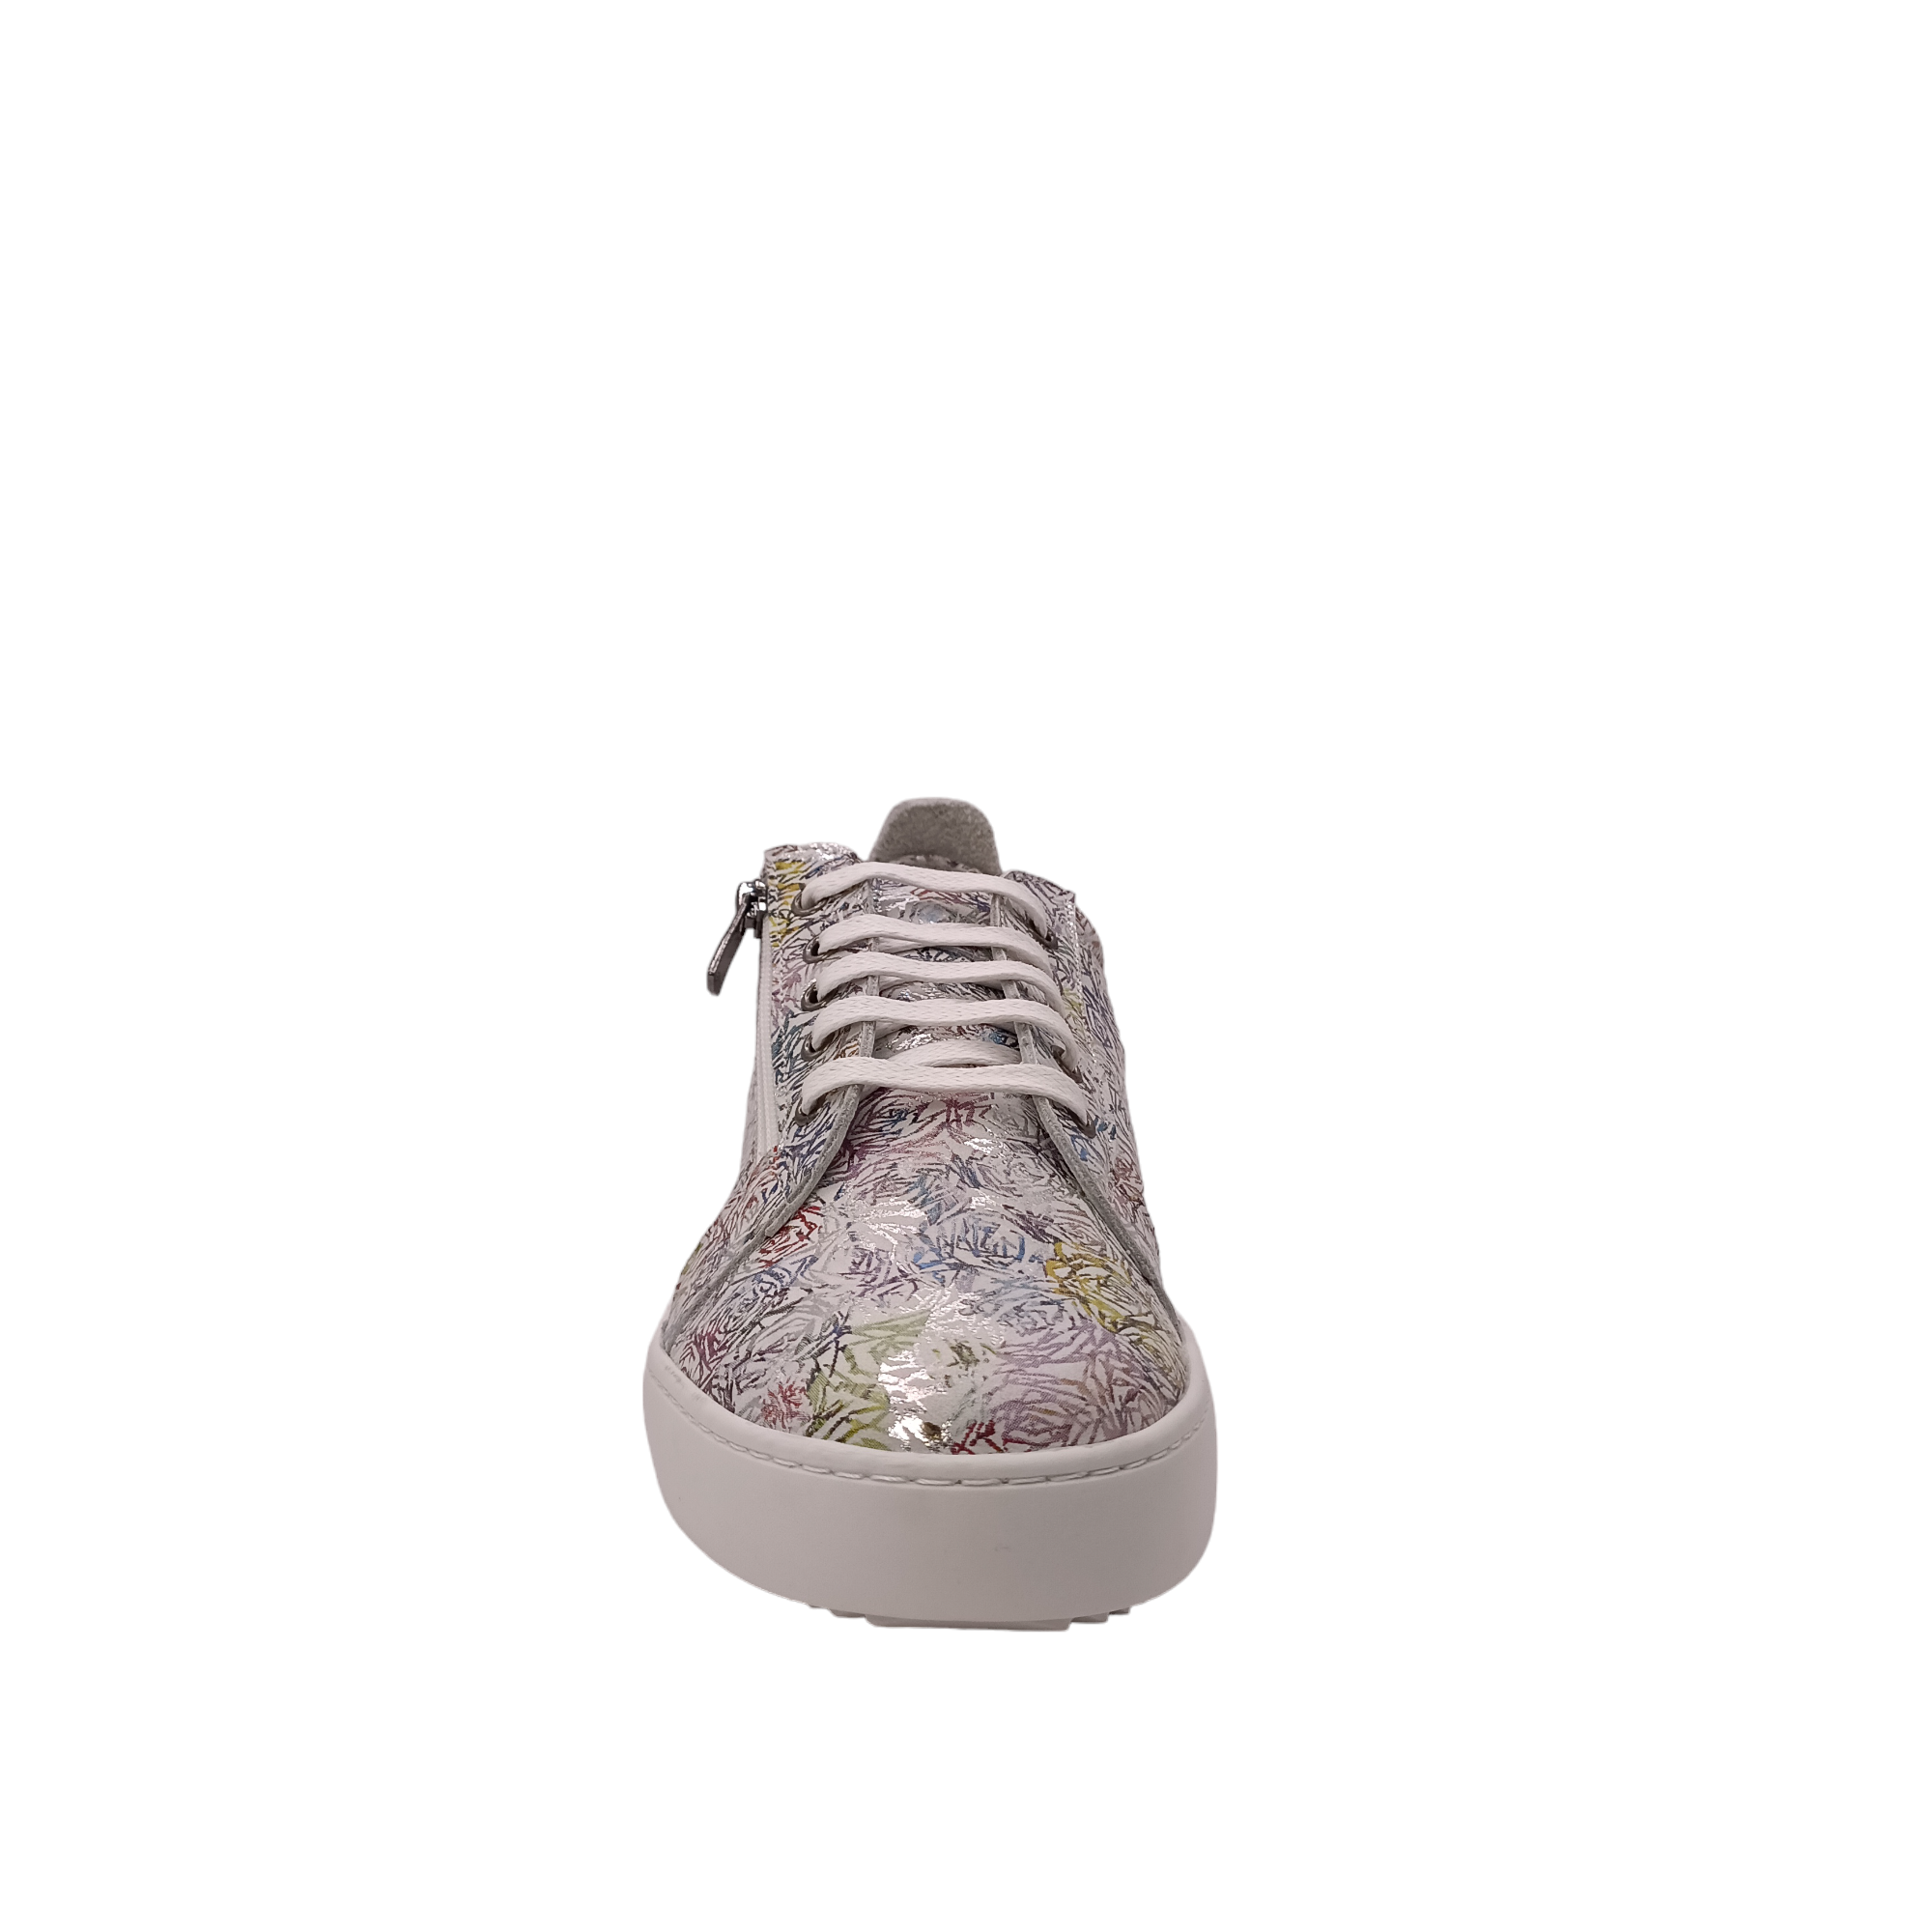 Side angle view of Tarzan Leather printed shoe with floral outlines, multi coloured print. White laces and sole. Shop Womens Rilassare Shoes Online and IN-store with shoe&amp;me NZ